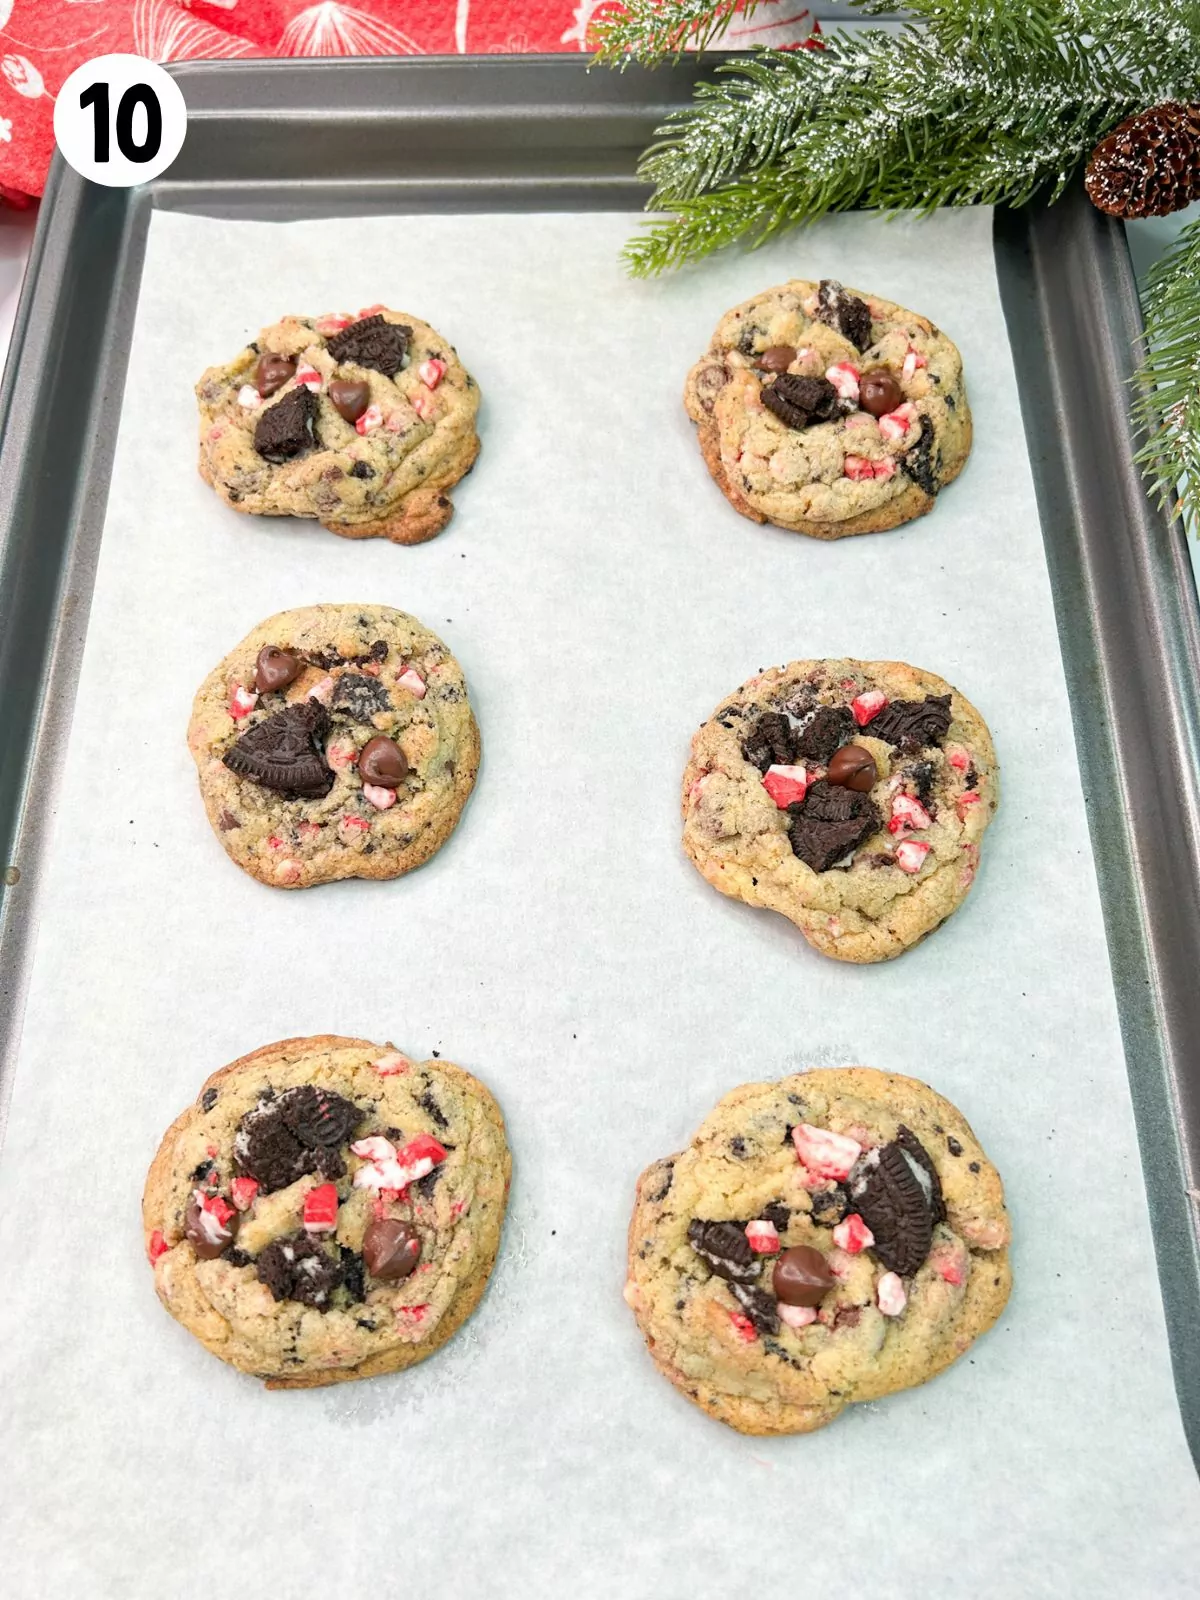 Baked cookies on tray with parchment paper.